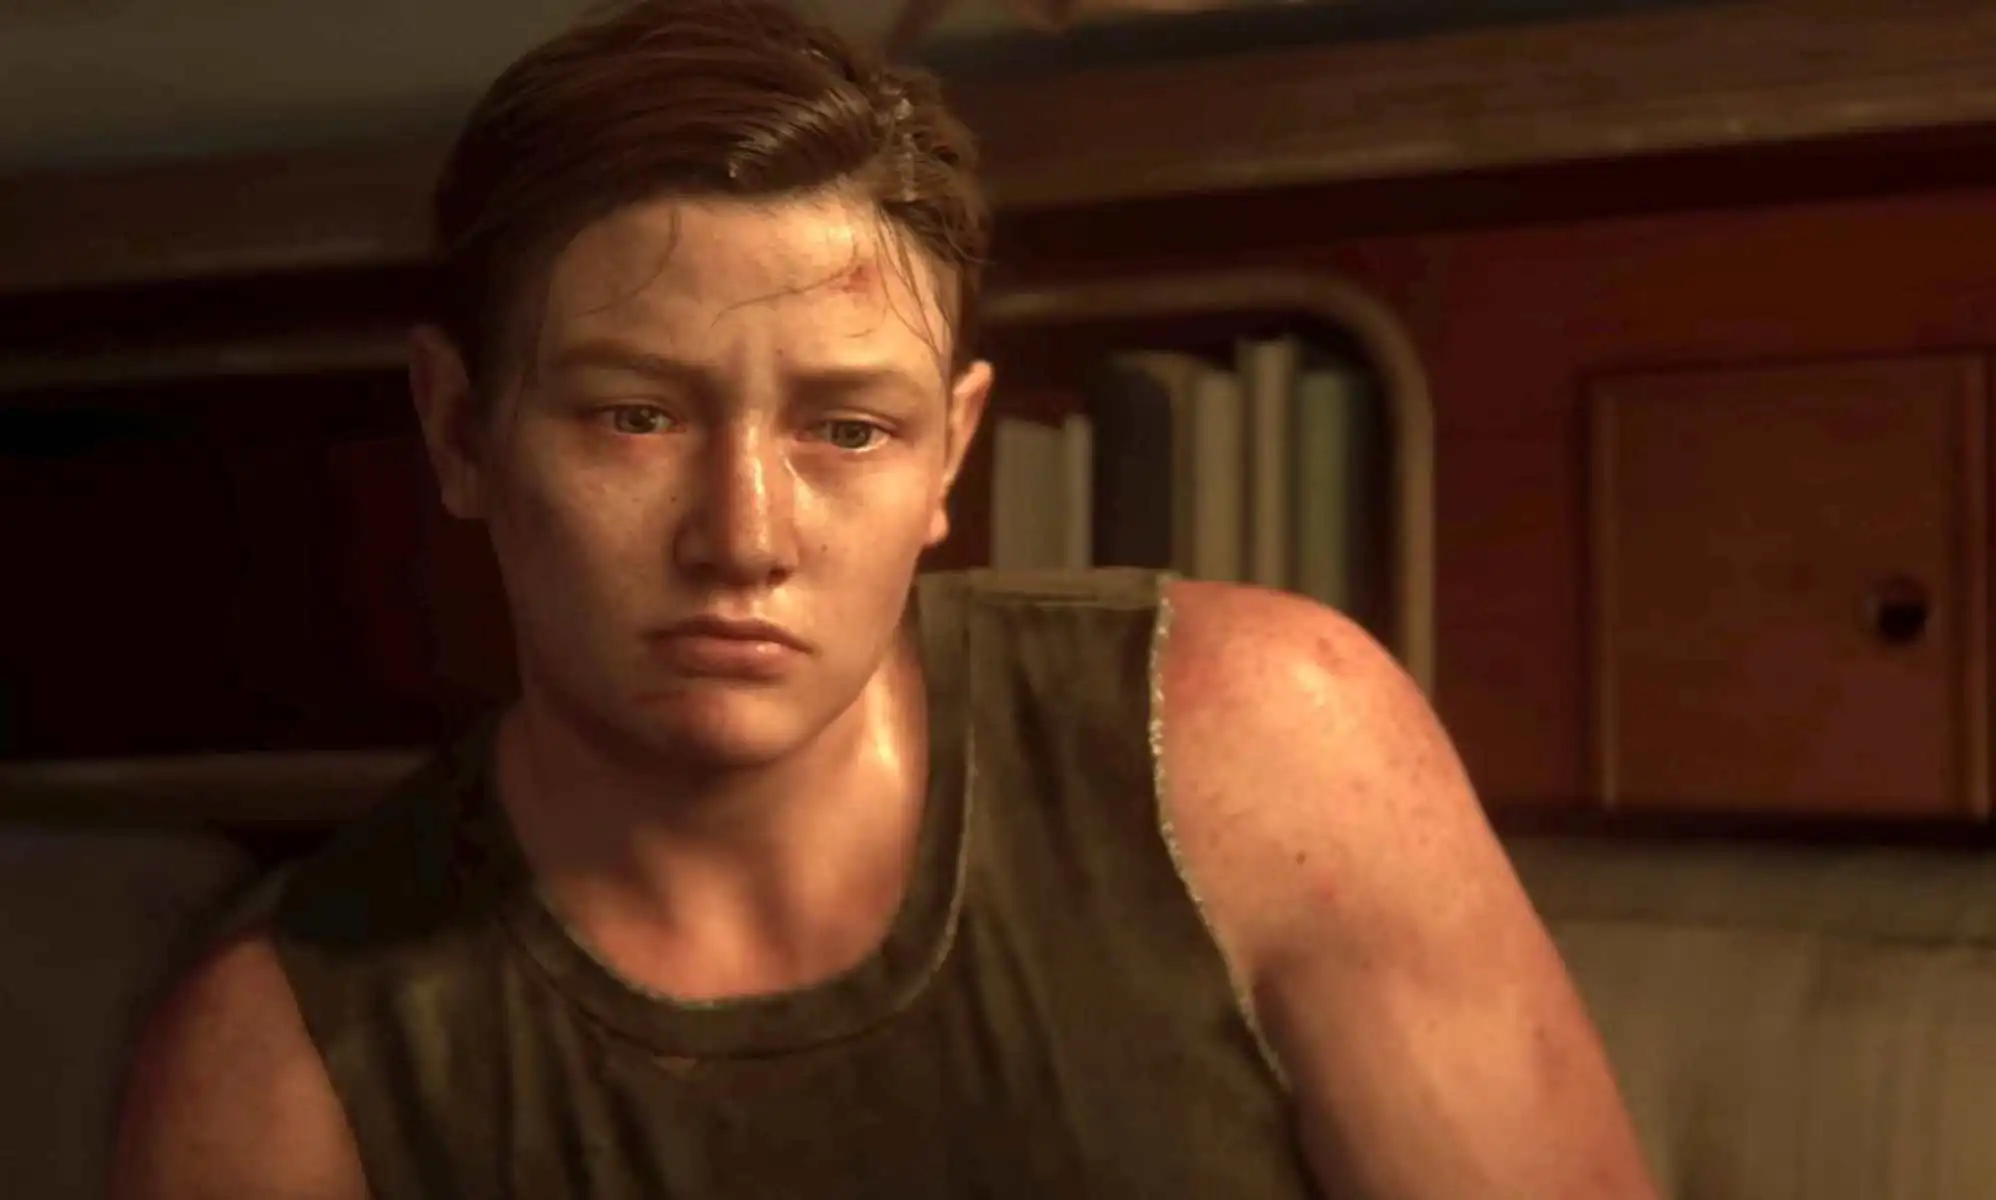 Craig Mazin Opens Up On Casting Of Abby For 'The Last Of Us 2